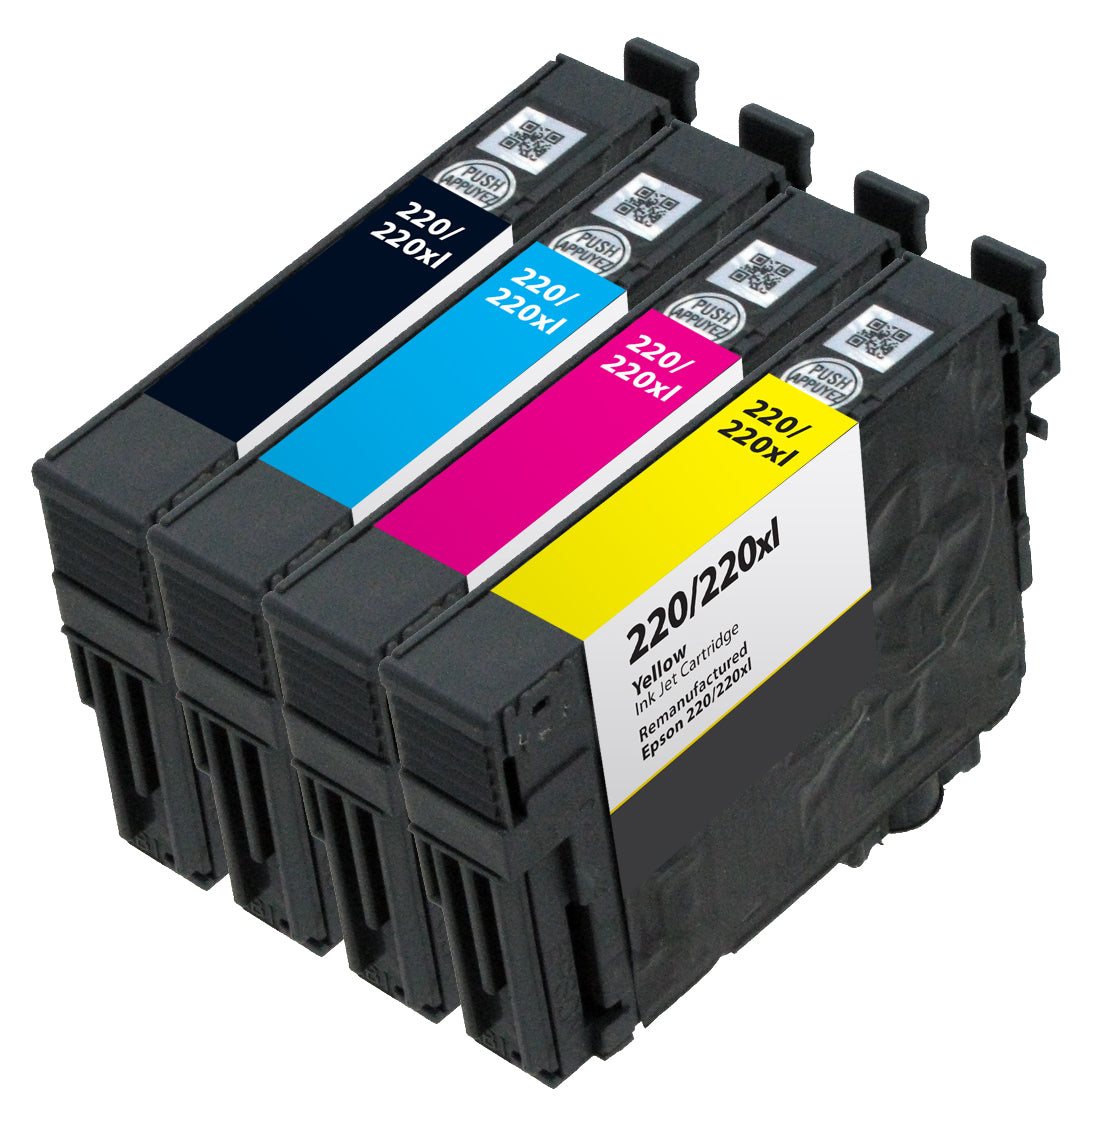 Compatible Ink Cartridges By Dubaria®